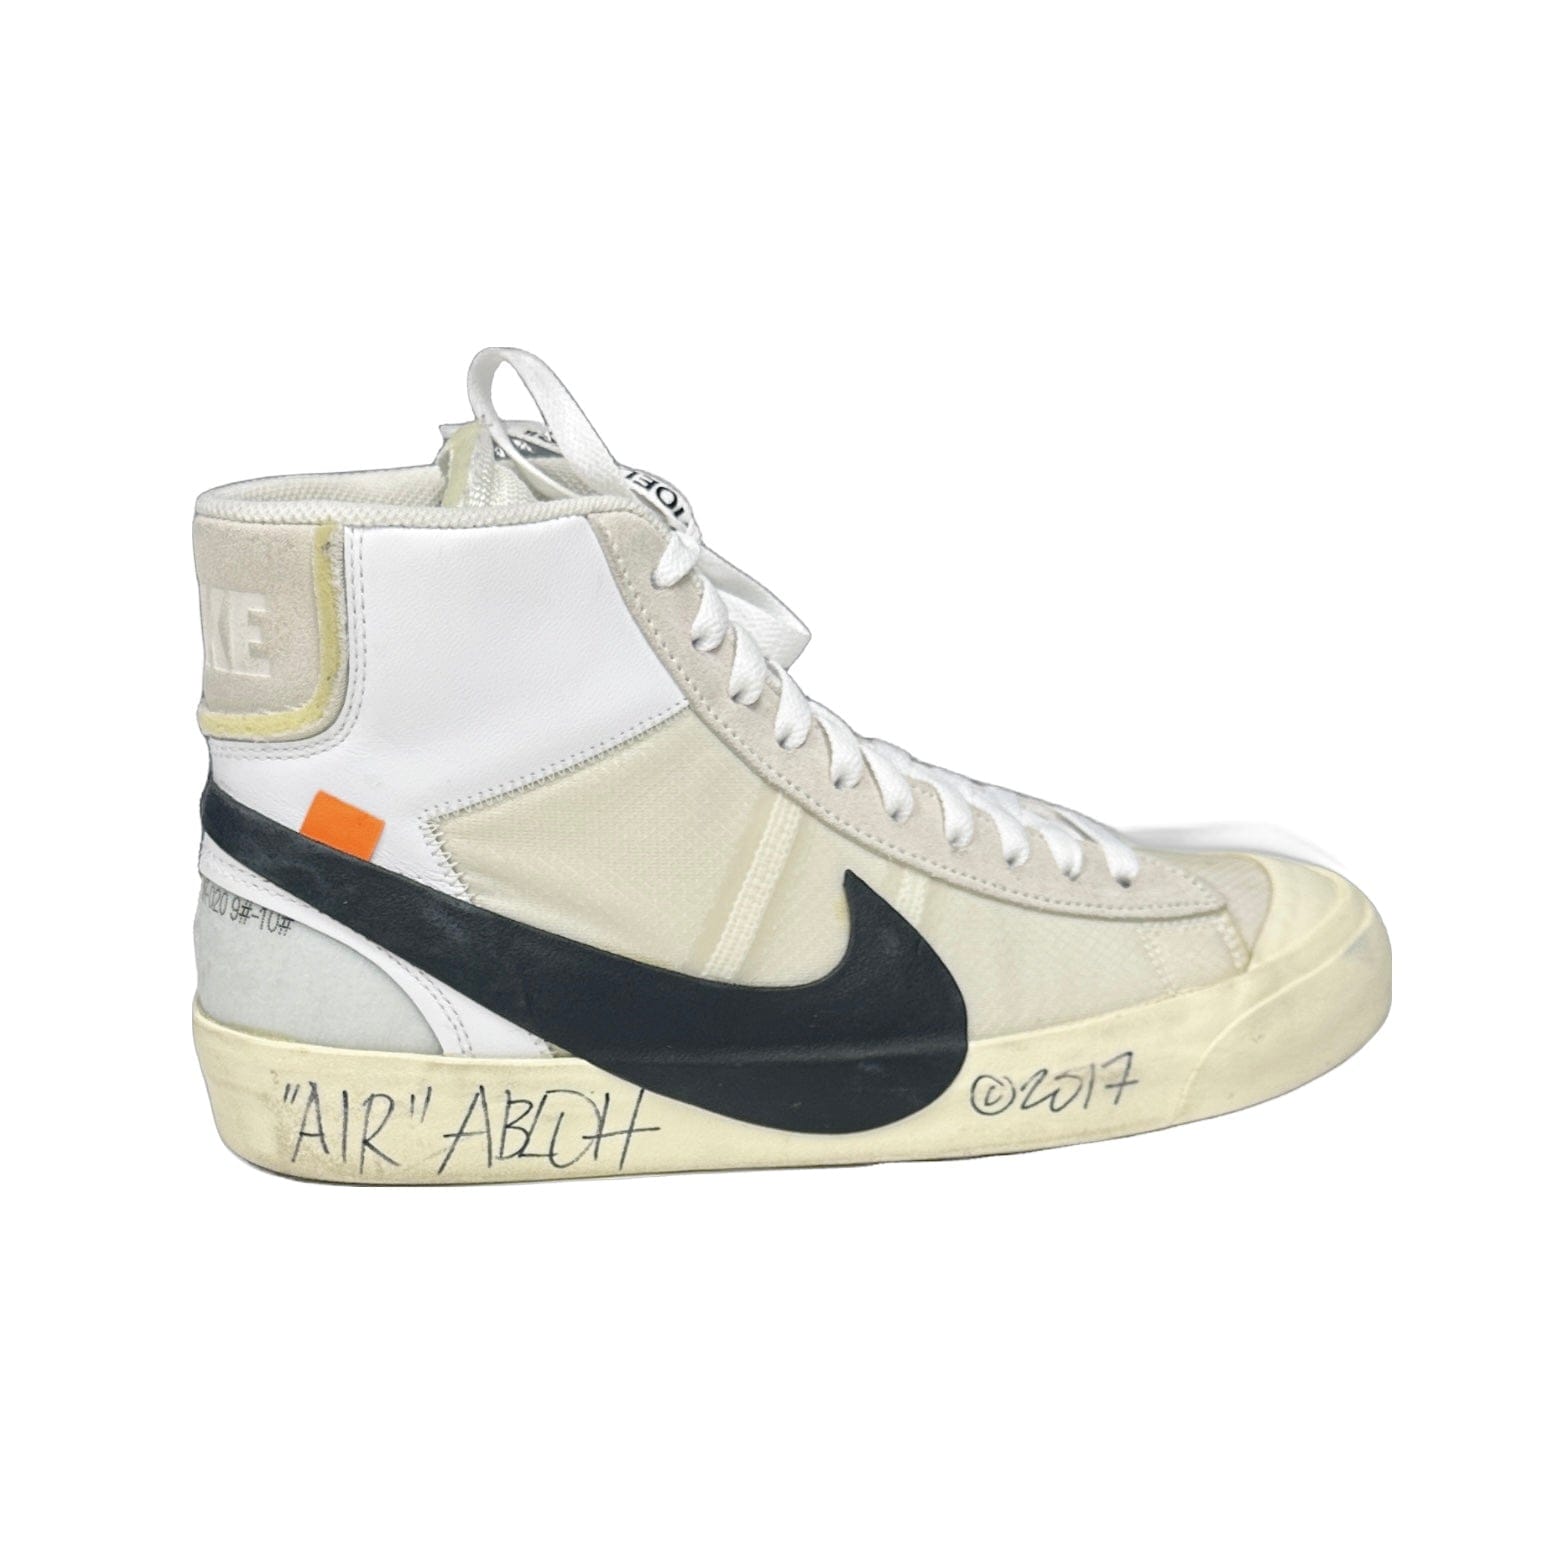 All The Stores Selling Nike And Virgil Abloh's 'The Ten' Sneakers